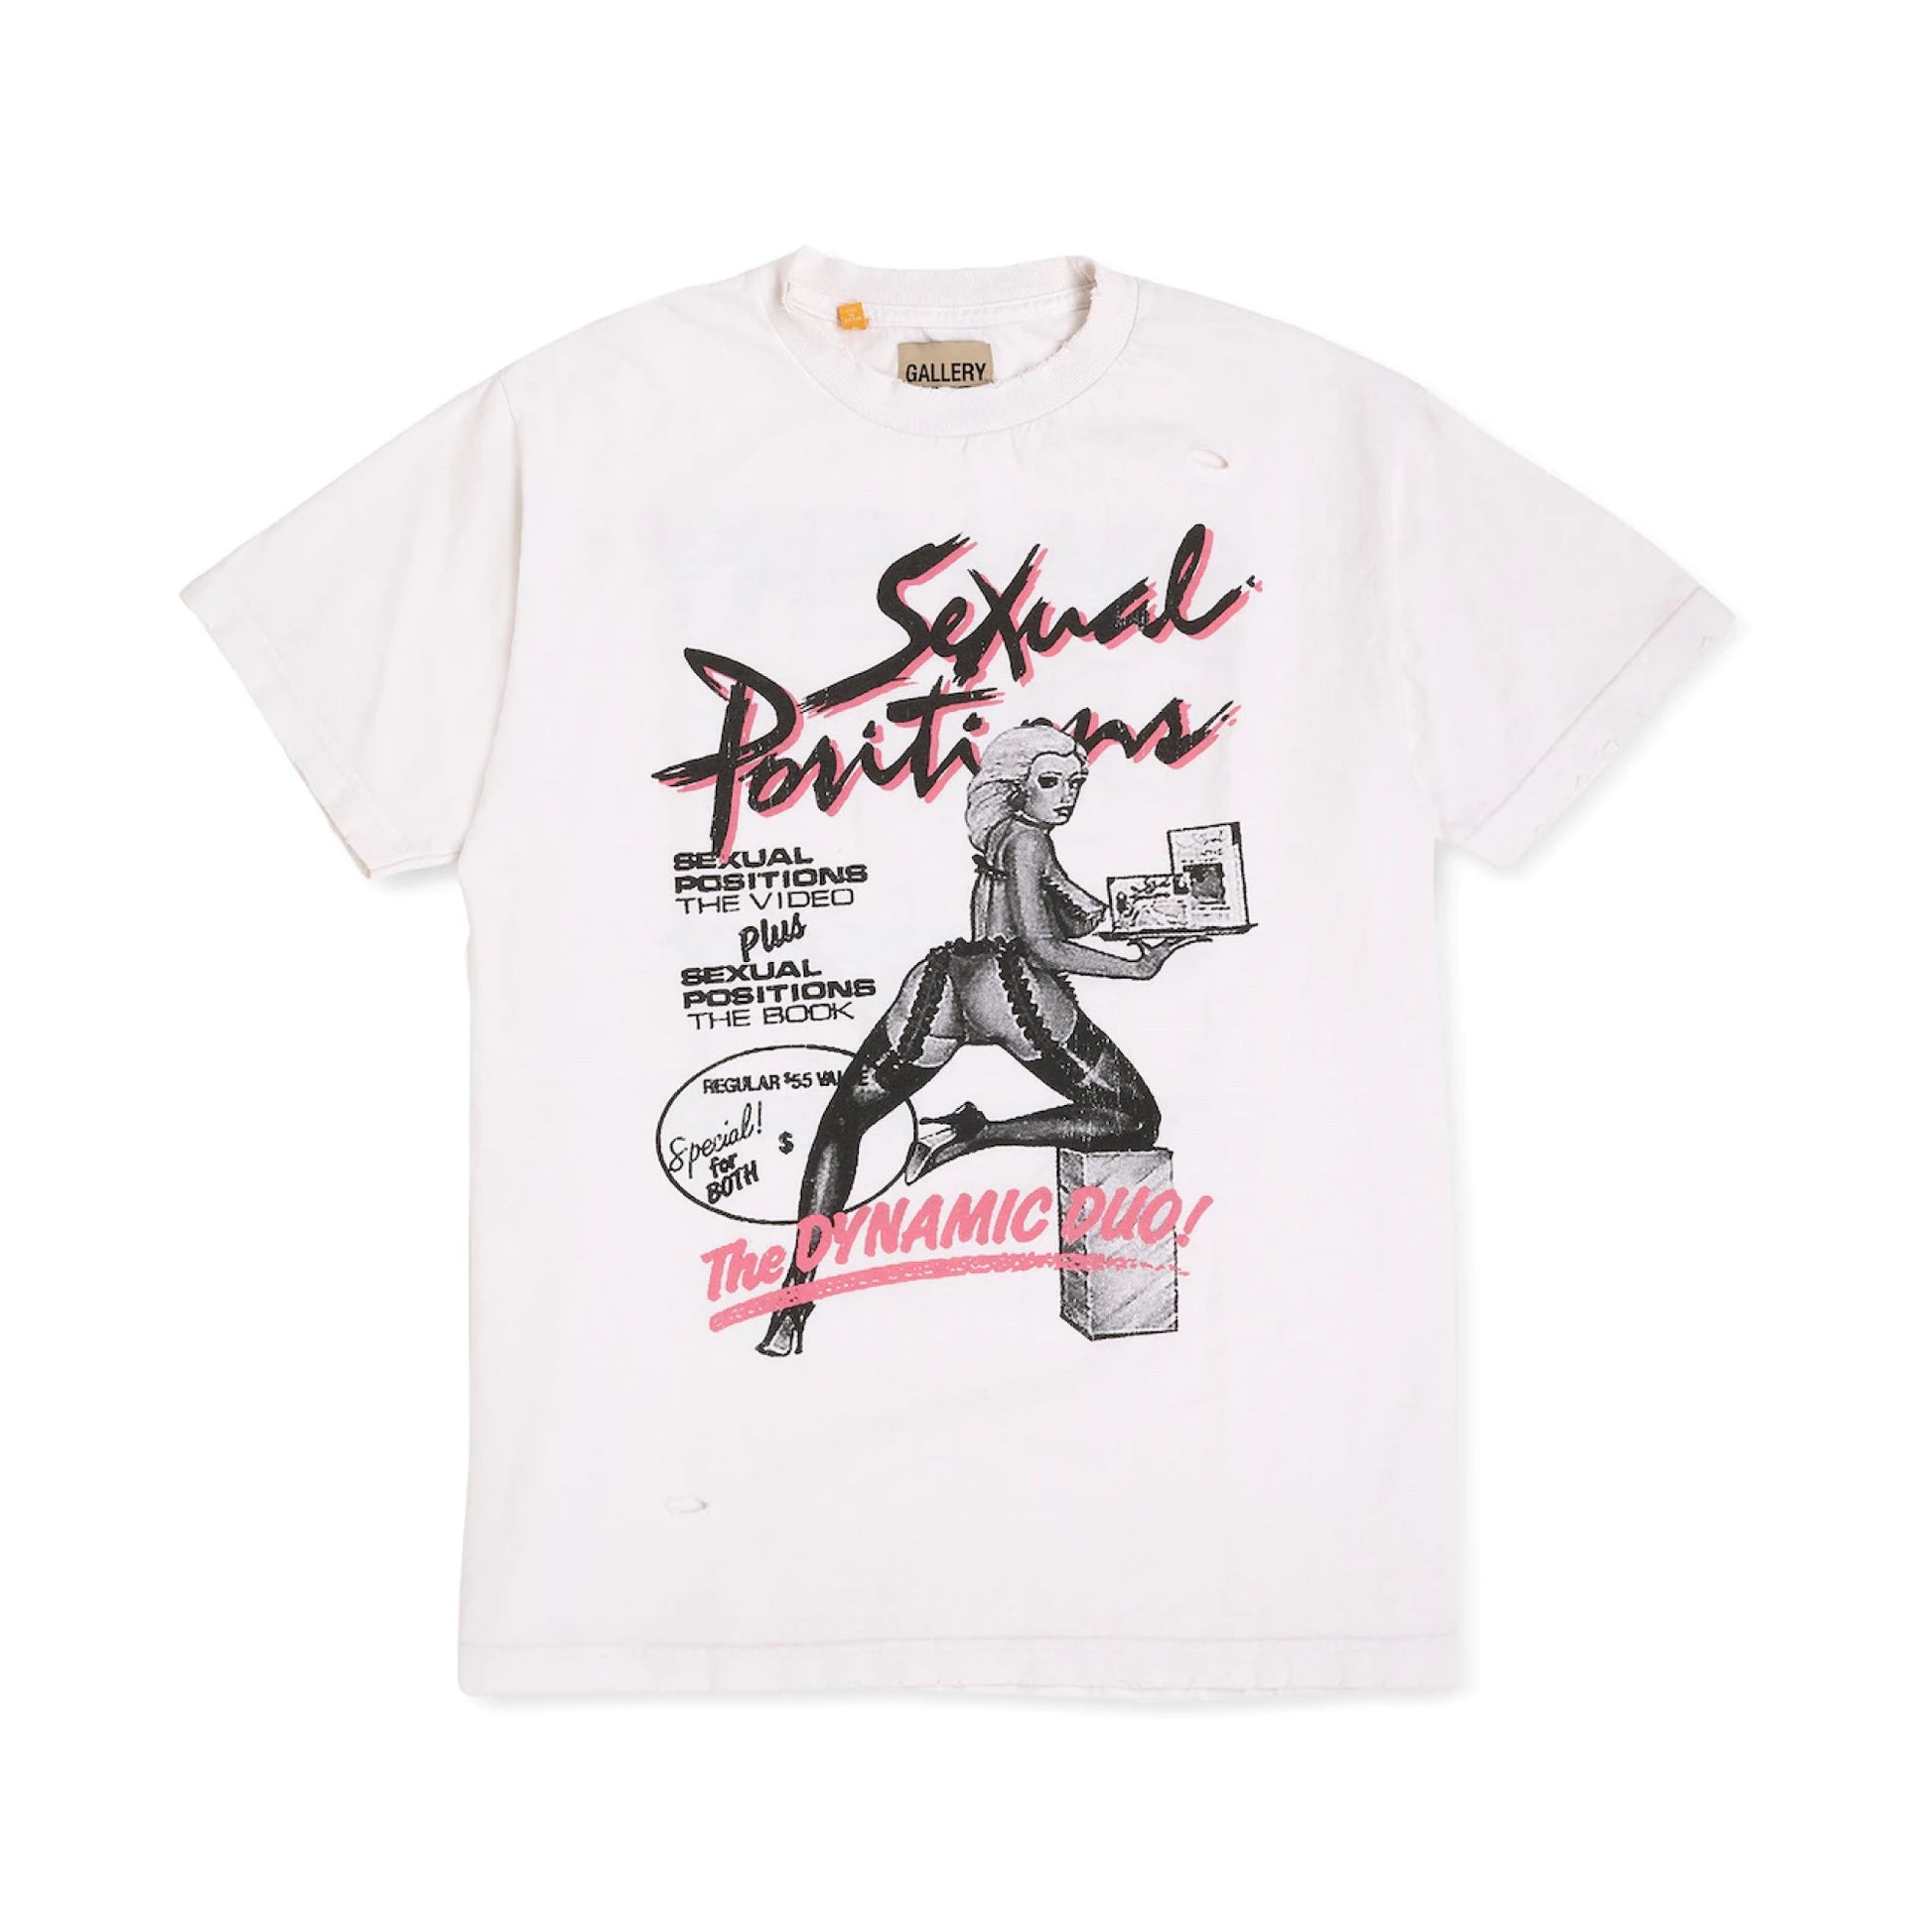 Gallery Dept. Doc Johnson Sexual Positions Tee White Gallery Dept.